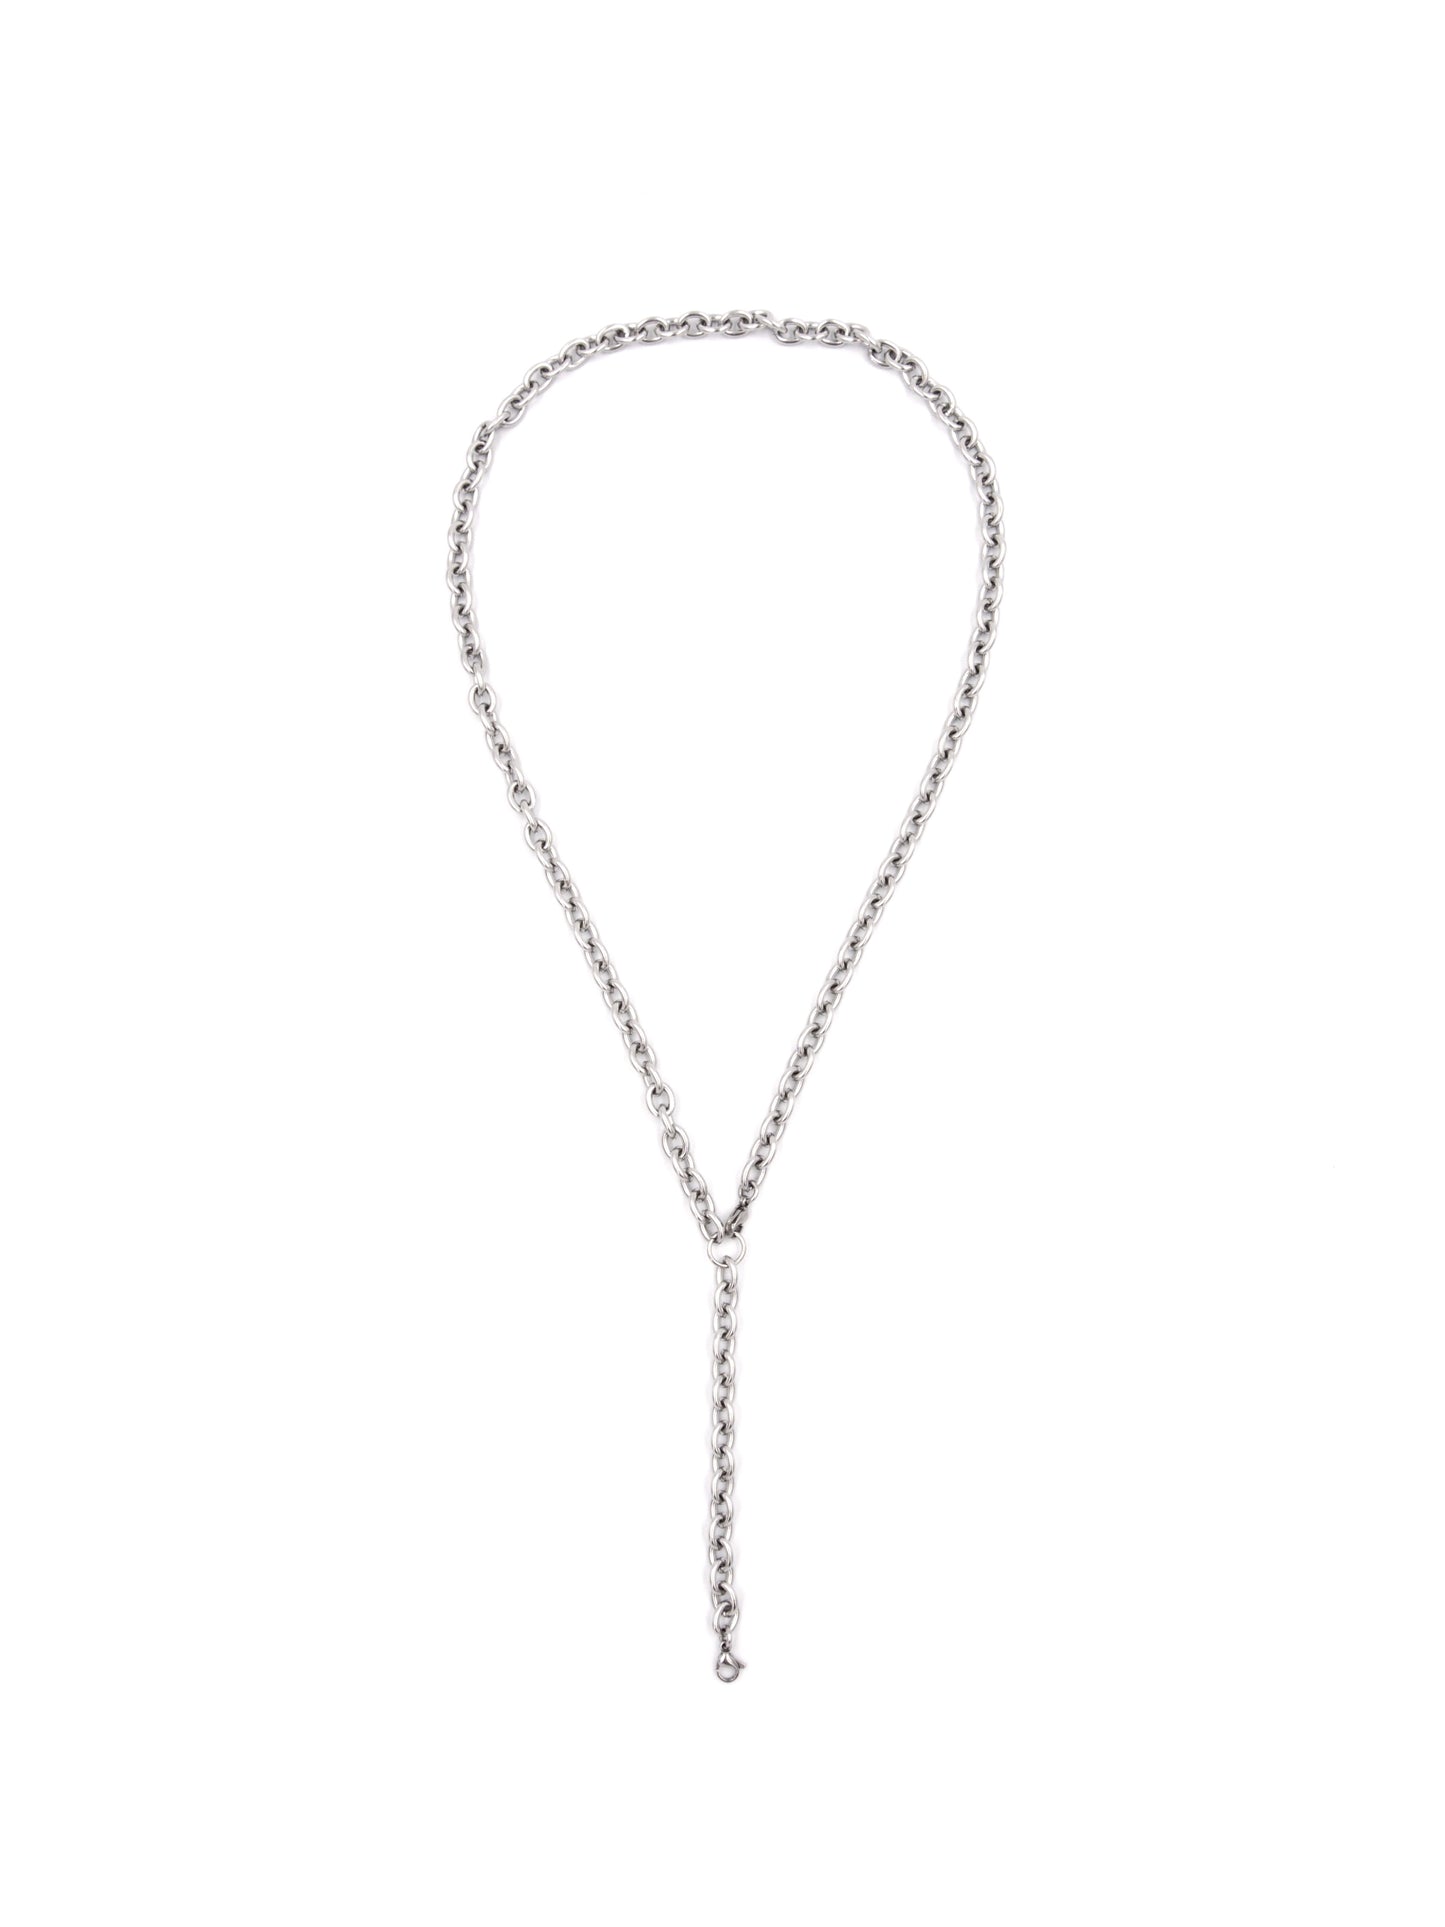 Basic 6mm Cable Chain Necklace